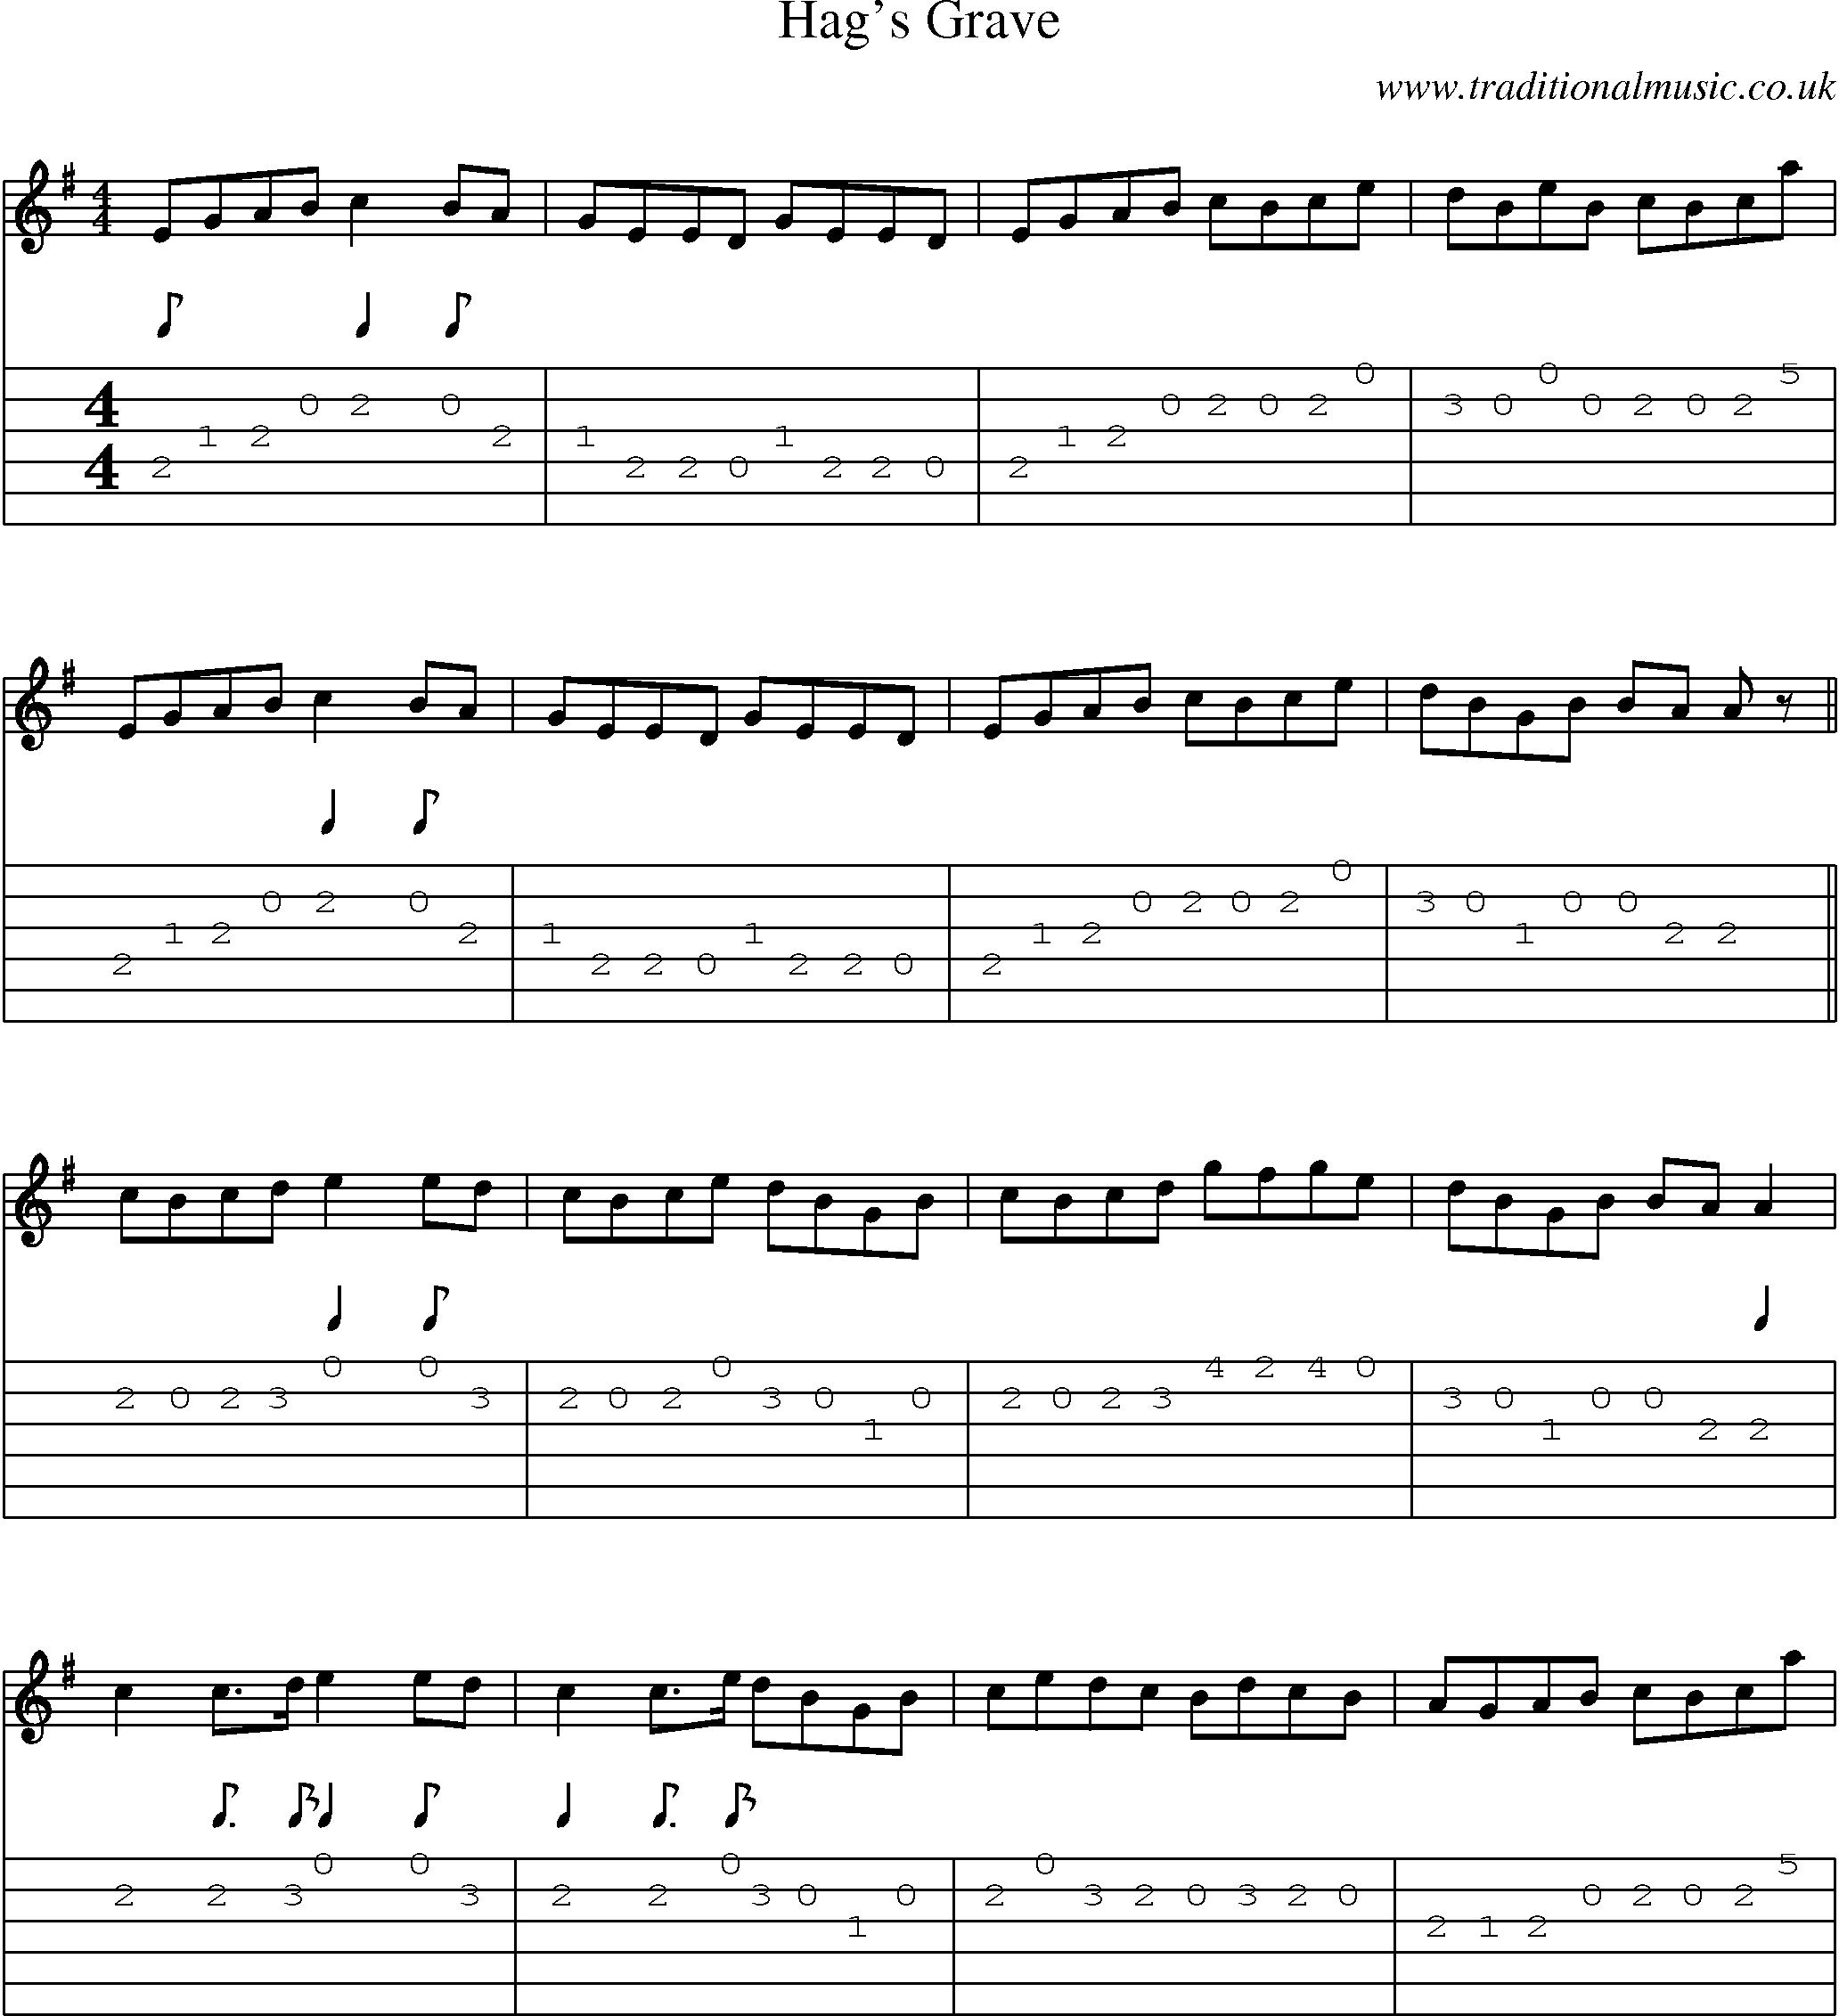 Music Score and Guitar Tabs for Hags Grave